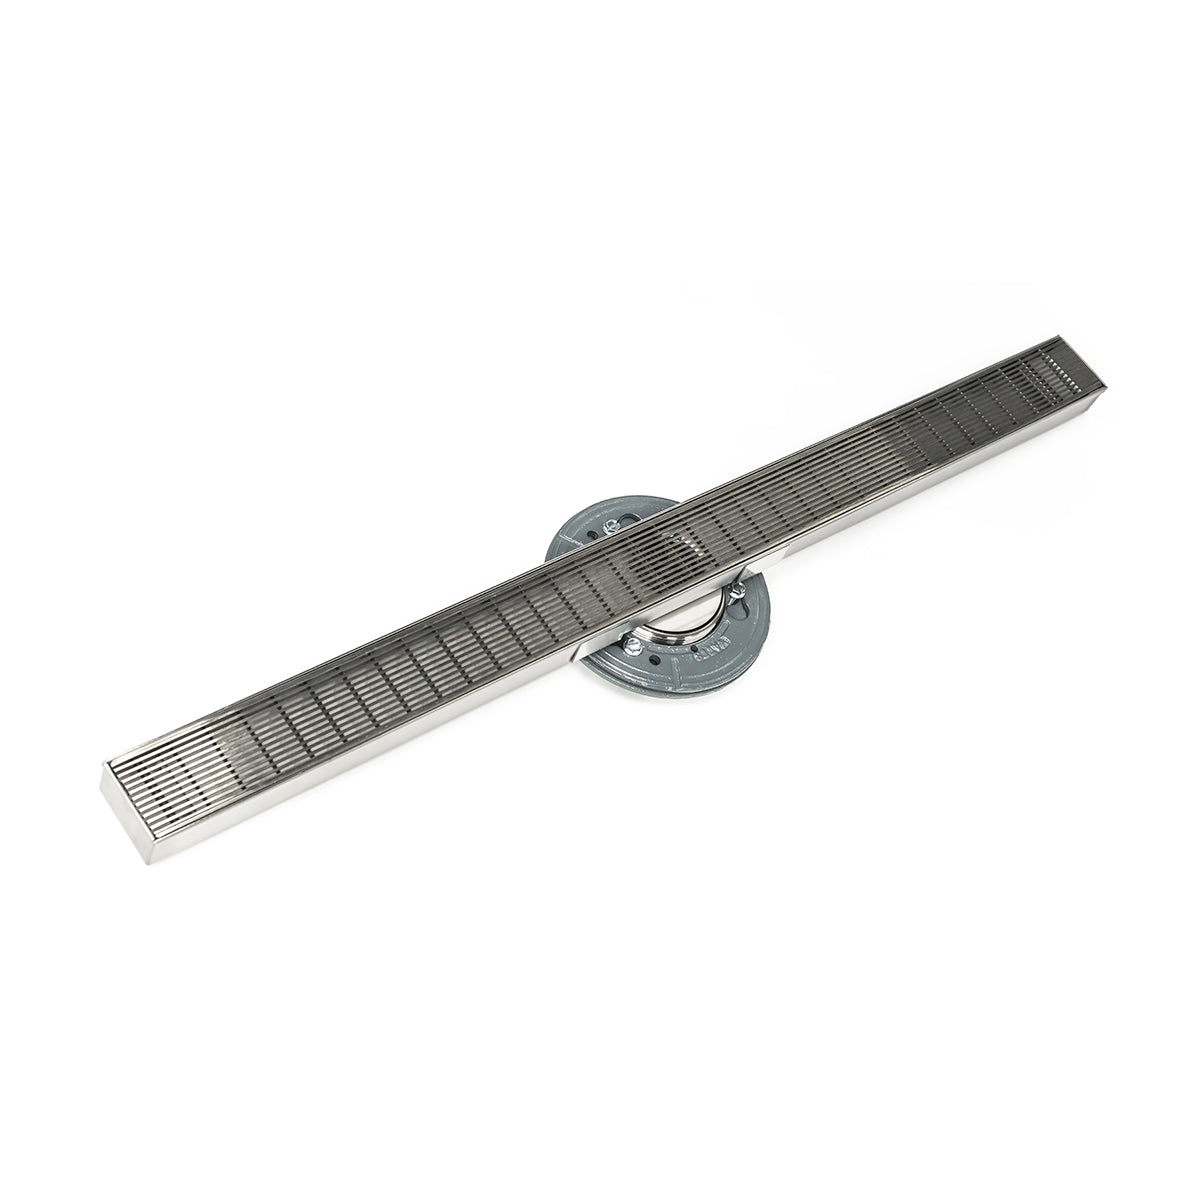 Infinity Drain 48" S-Stainless Steel Series High Flow Site Sizable Linear Drain Kit with 2 1/2" Wedge Wire Grate with PVC Drain Body, 3" Outlet